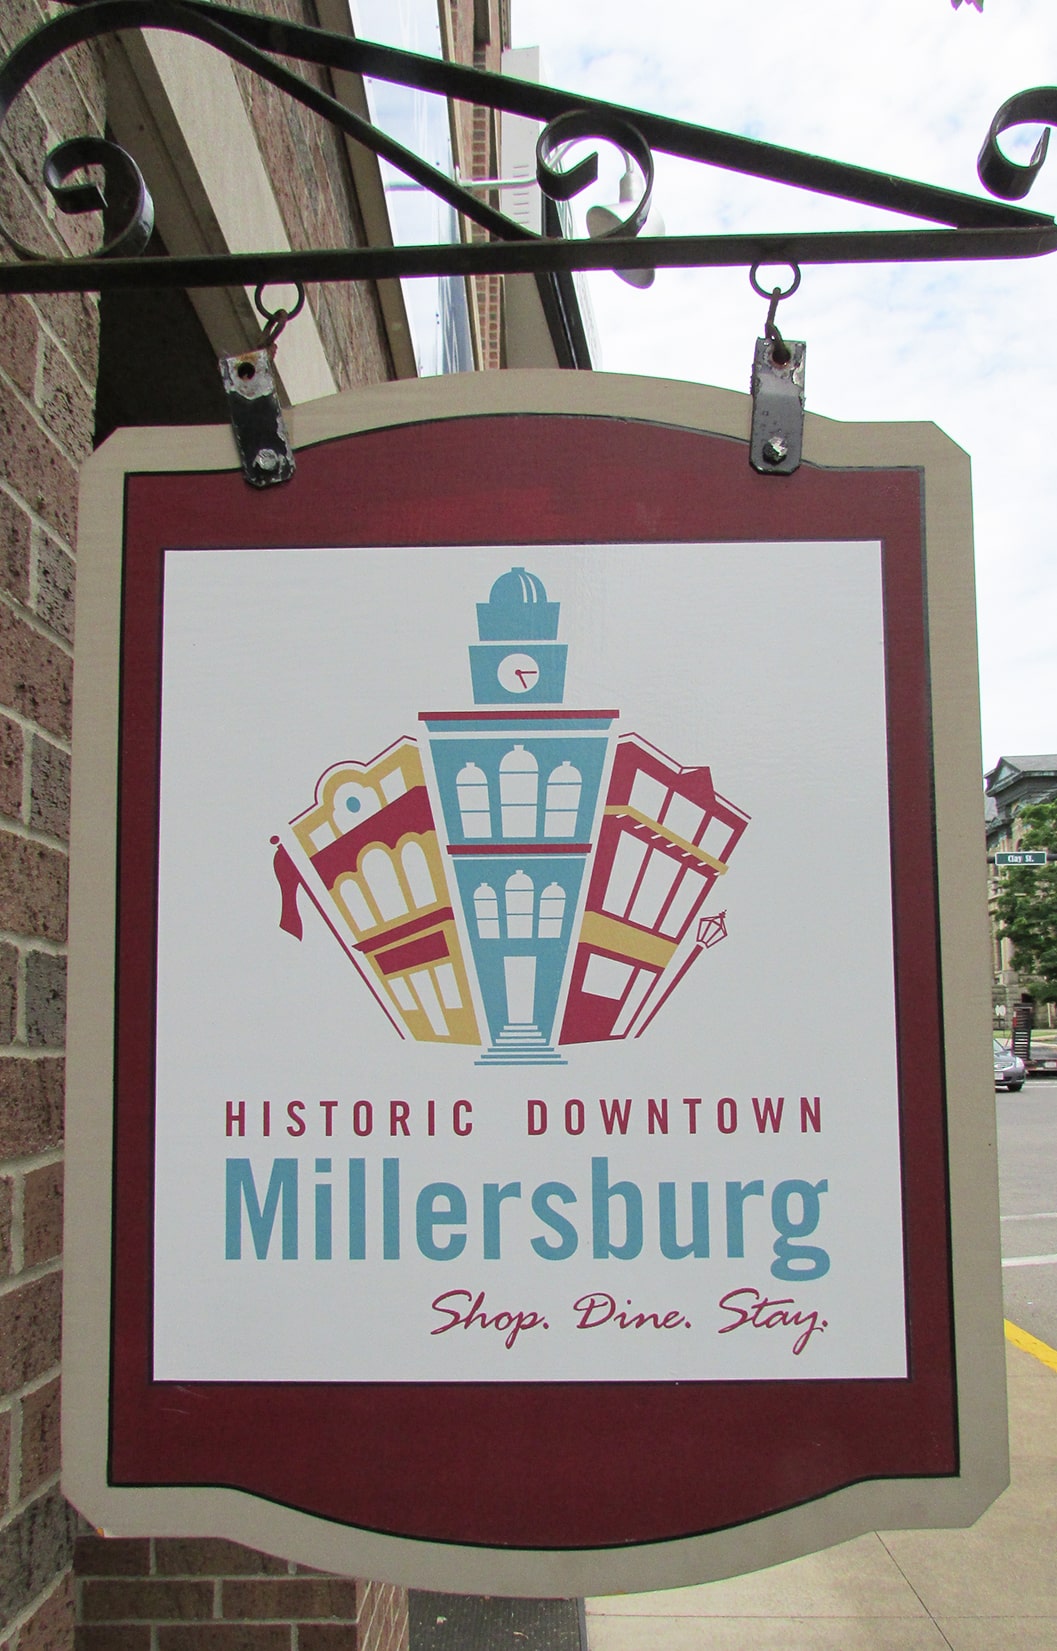 vertical photo showing the Historic Downtown Millersburg sign hanging from a fancy bracket on a wall. Image Wikimedia Commons https://commons.wikimedia.org/wiki/File:6_W_Jackson_2016-06-17_066.jpg